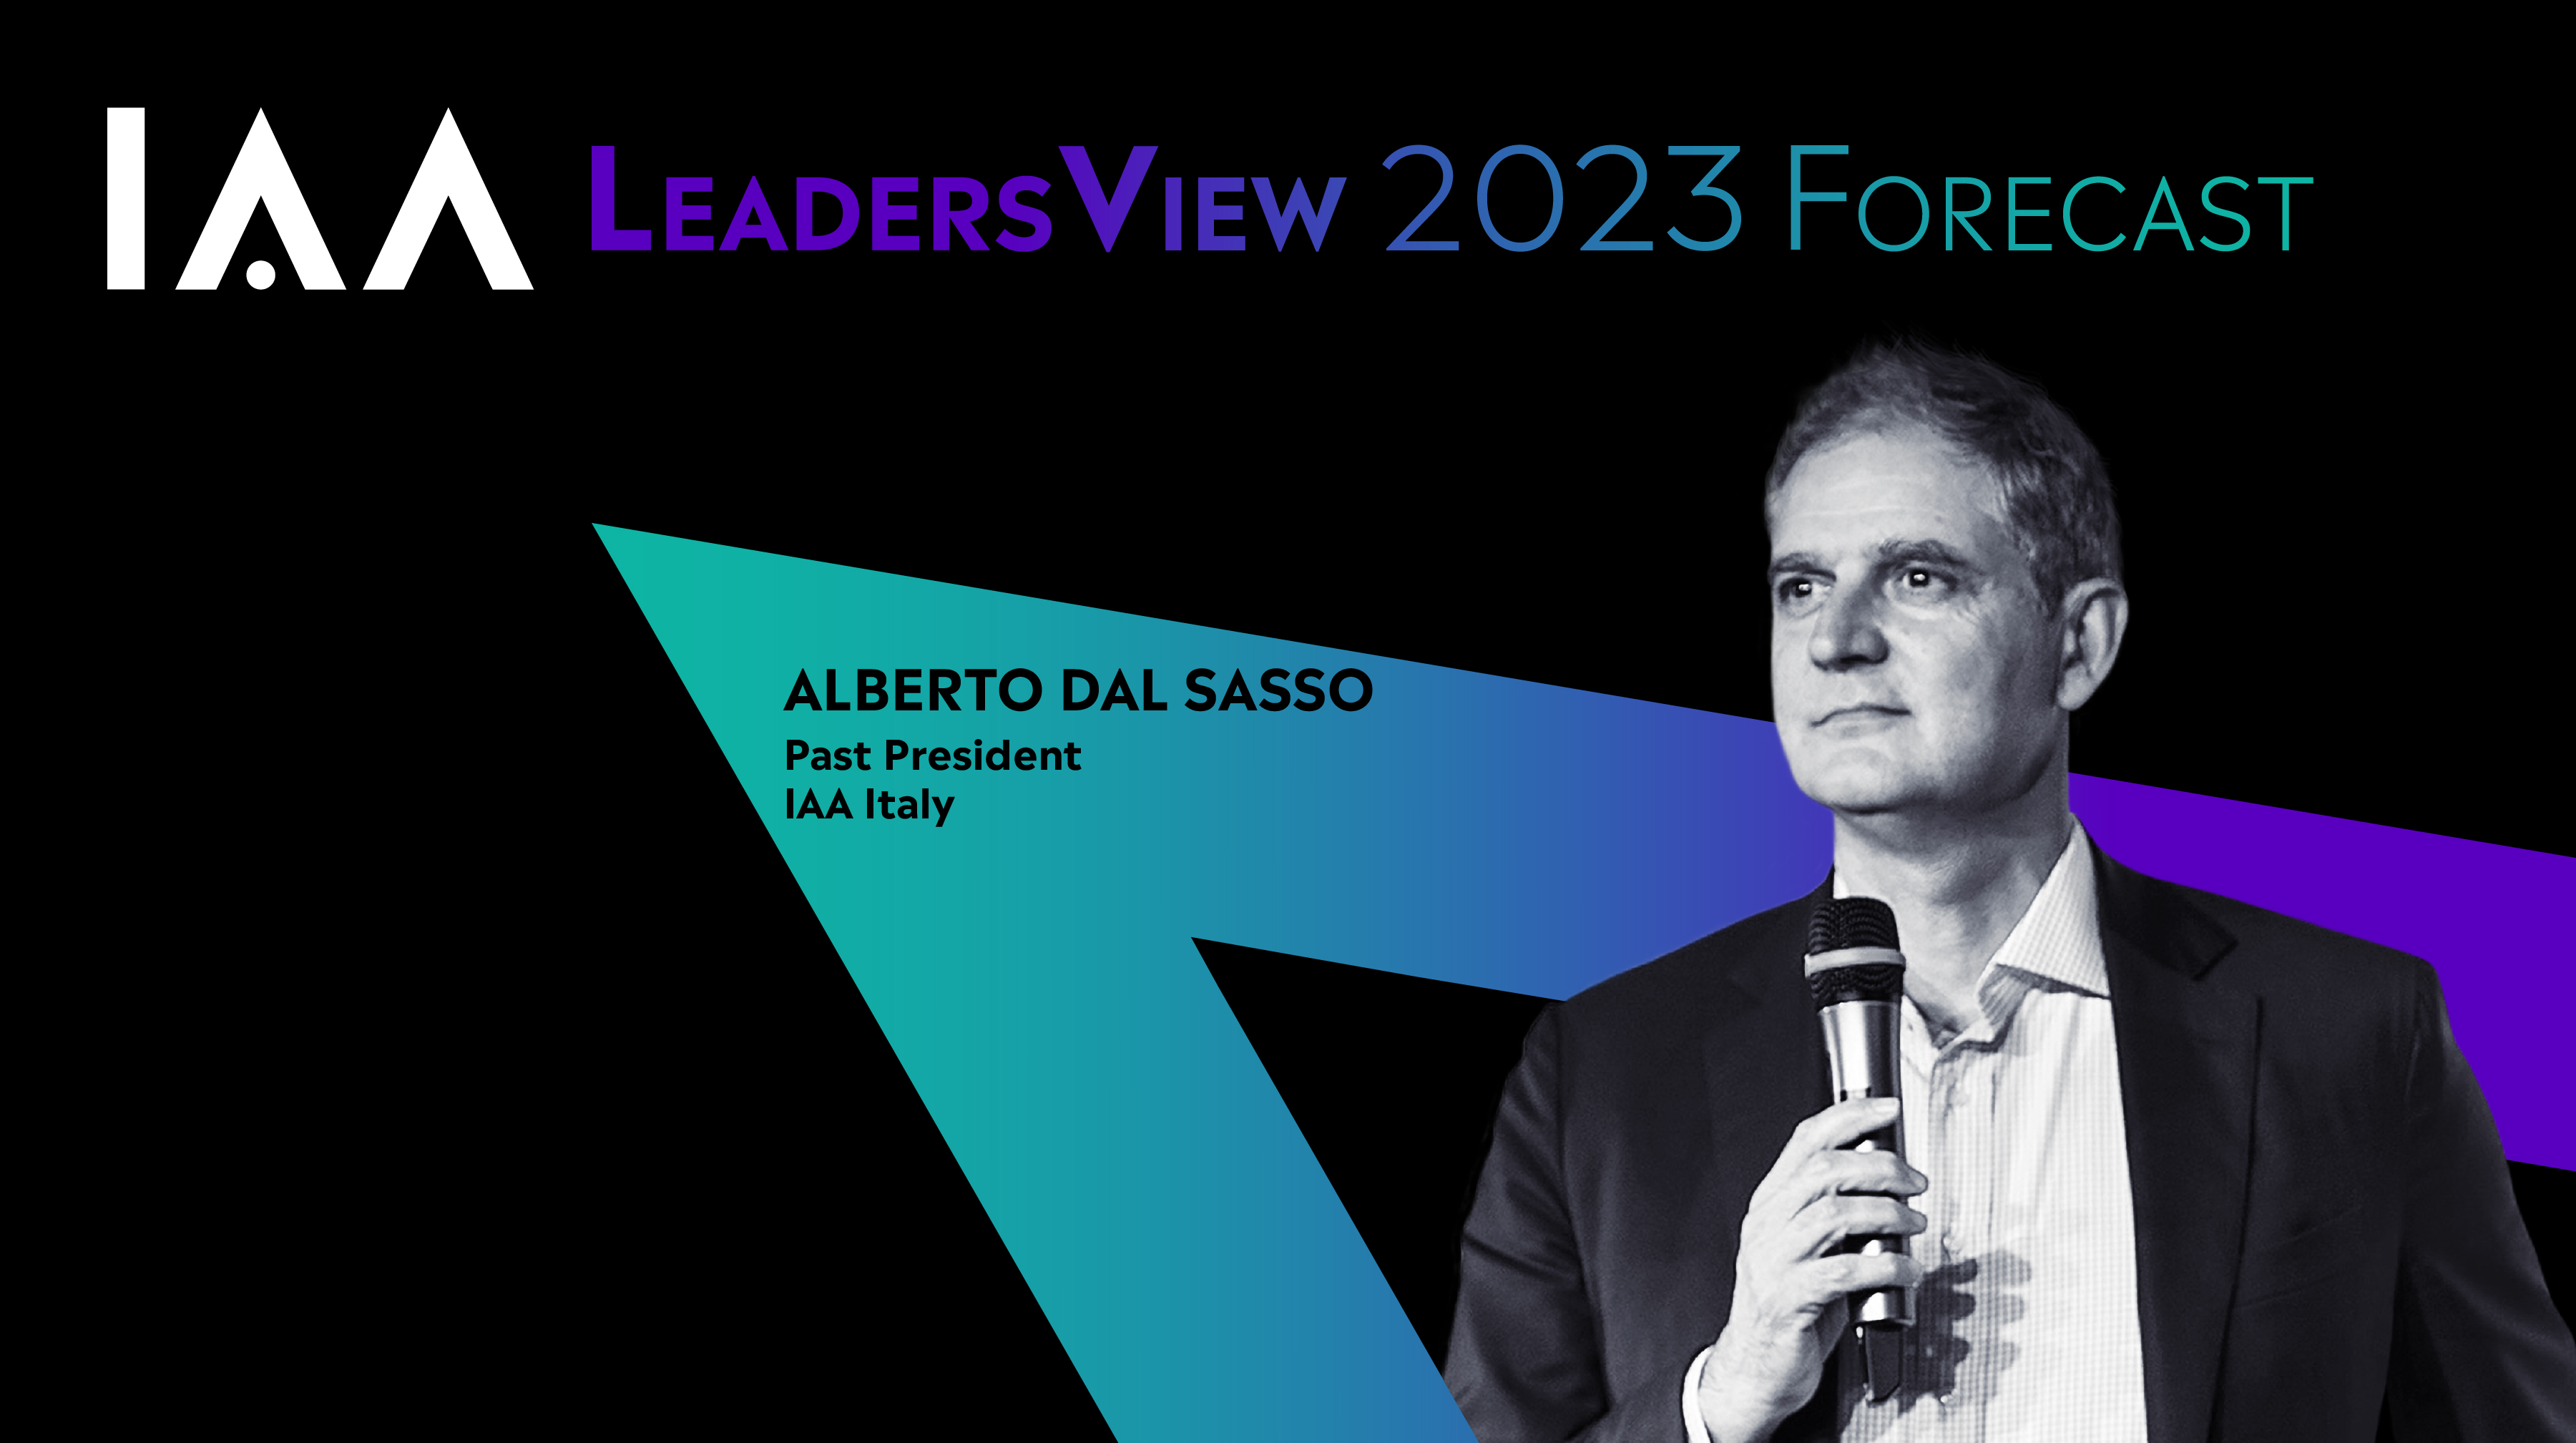 Leaders view 2023 forecast